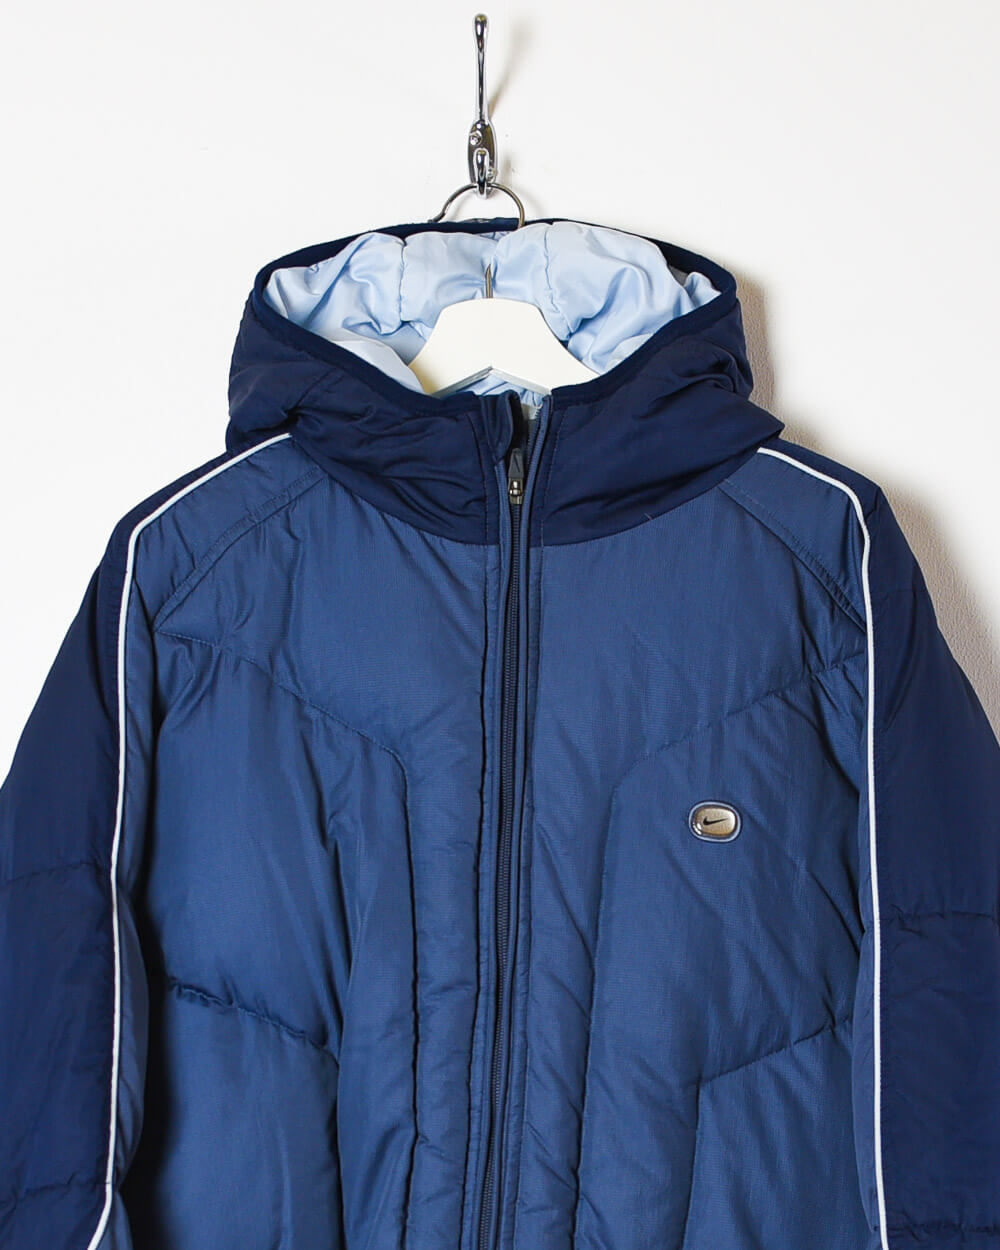 Navy Nike Hooded Down Puffer Jacket - X-Large